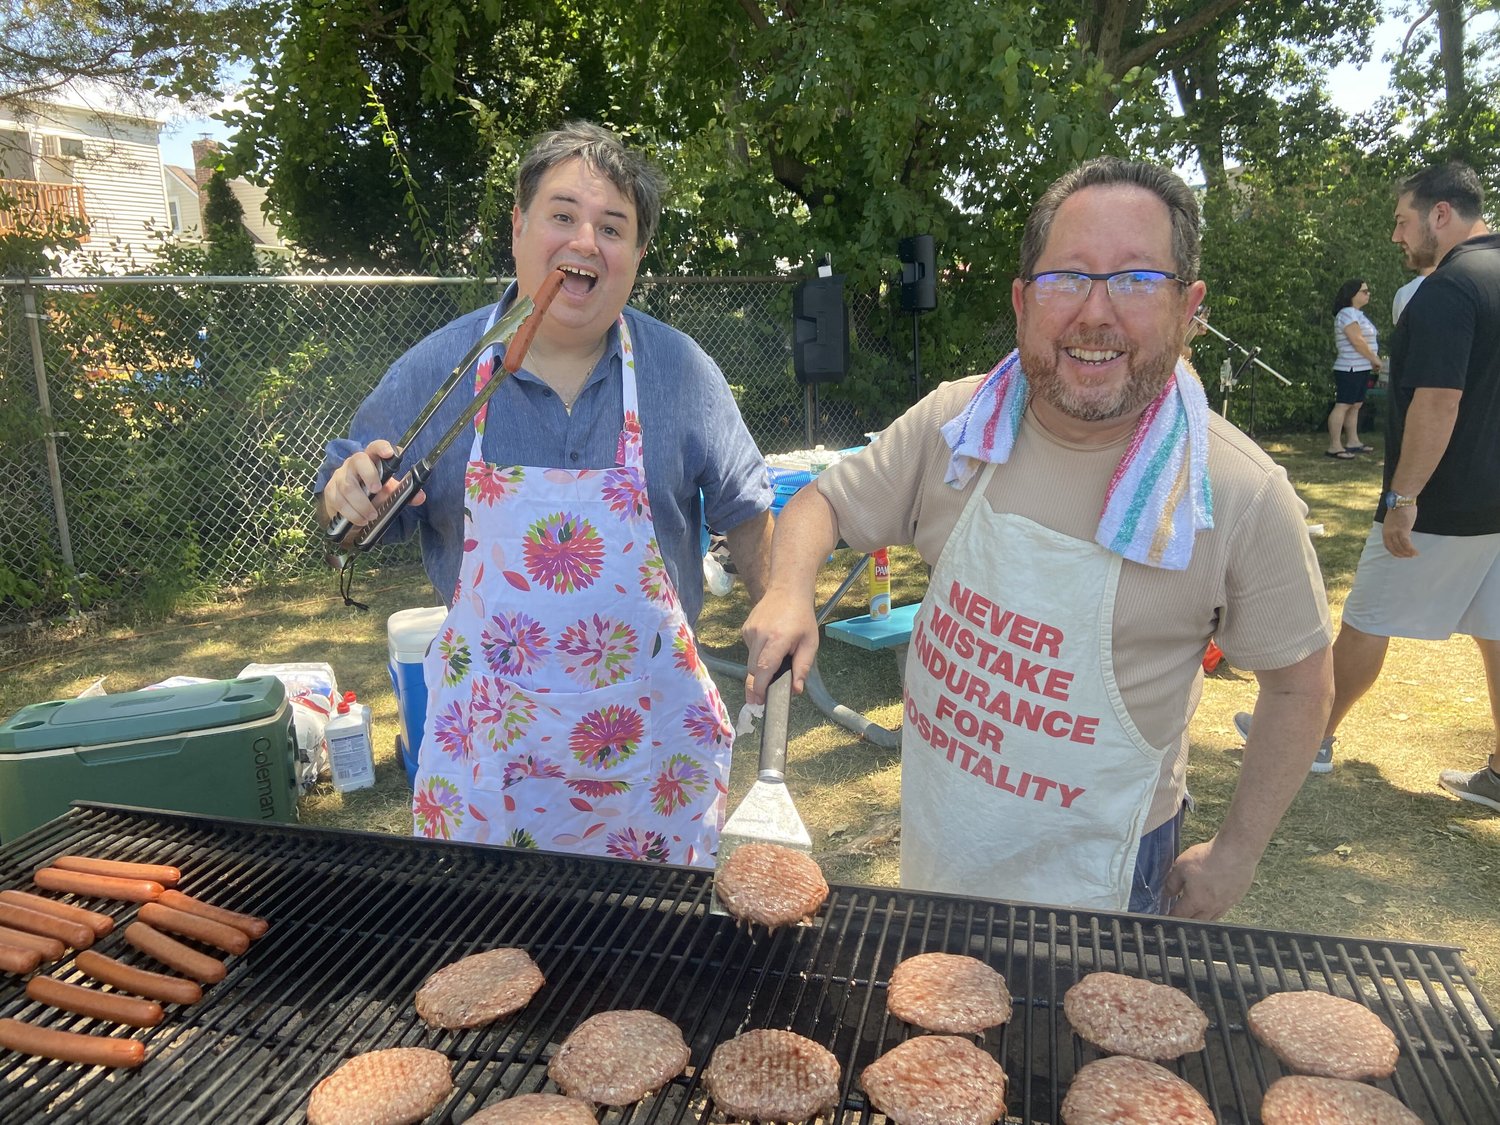 Ross Schiller, left, and Eric Vogel were chef-ing it up at the picnic on July 23.